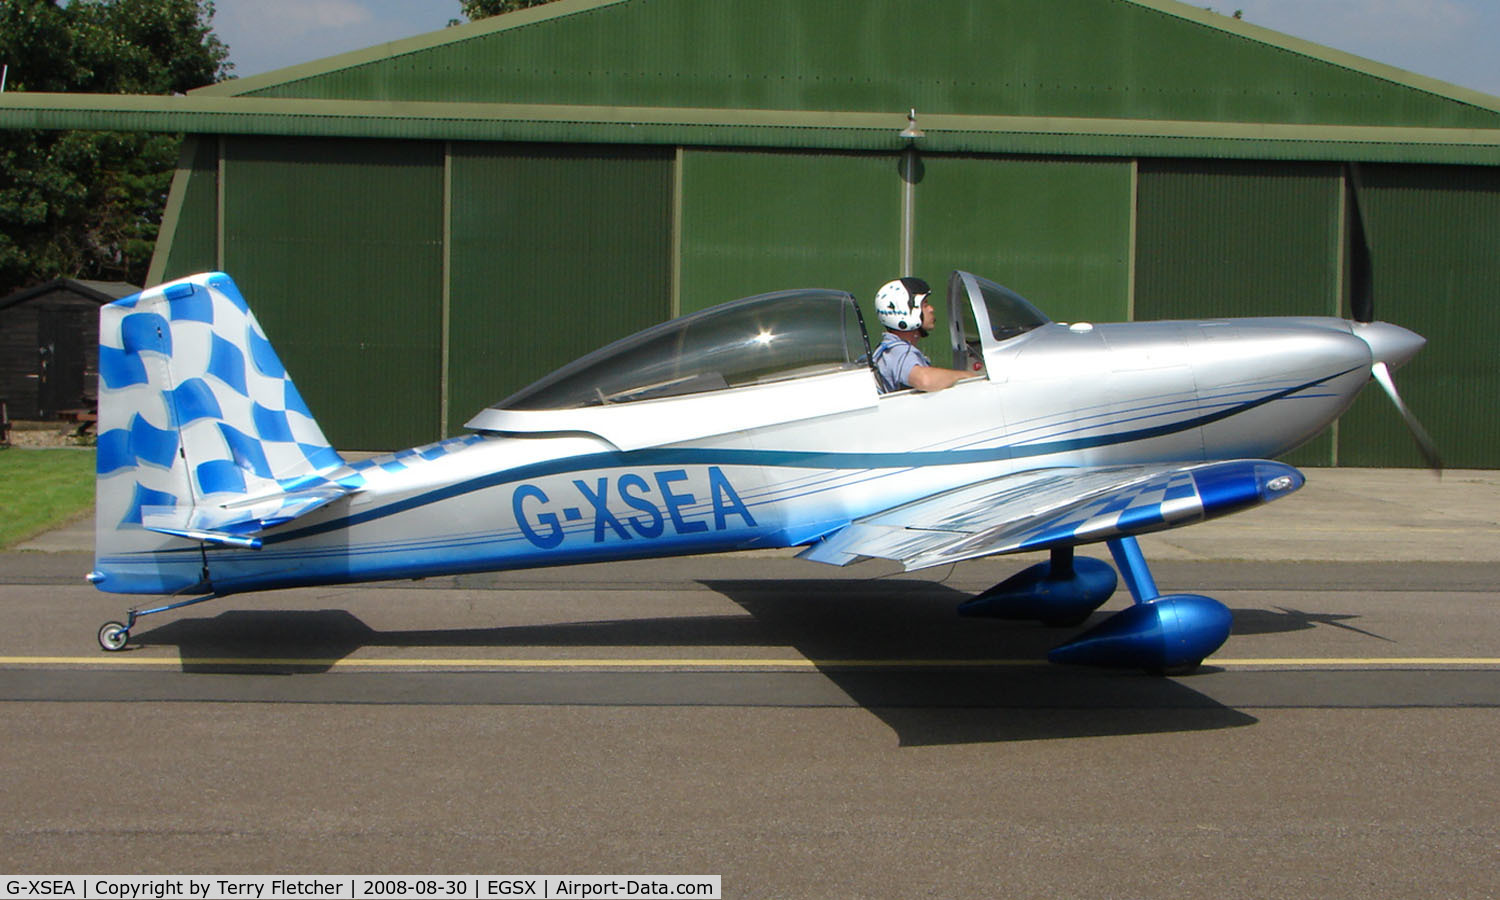 G-XSEA, 2005 Vans RV-8 C/N PFA 303-14228, Participant in the 2008 RV Fly-in at North Weald Uk